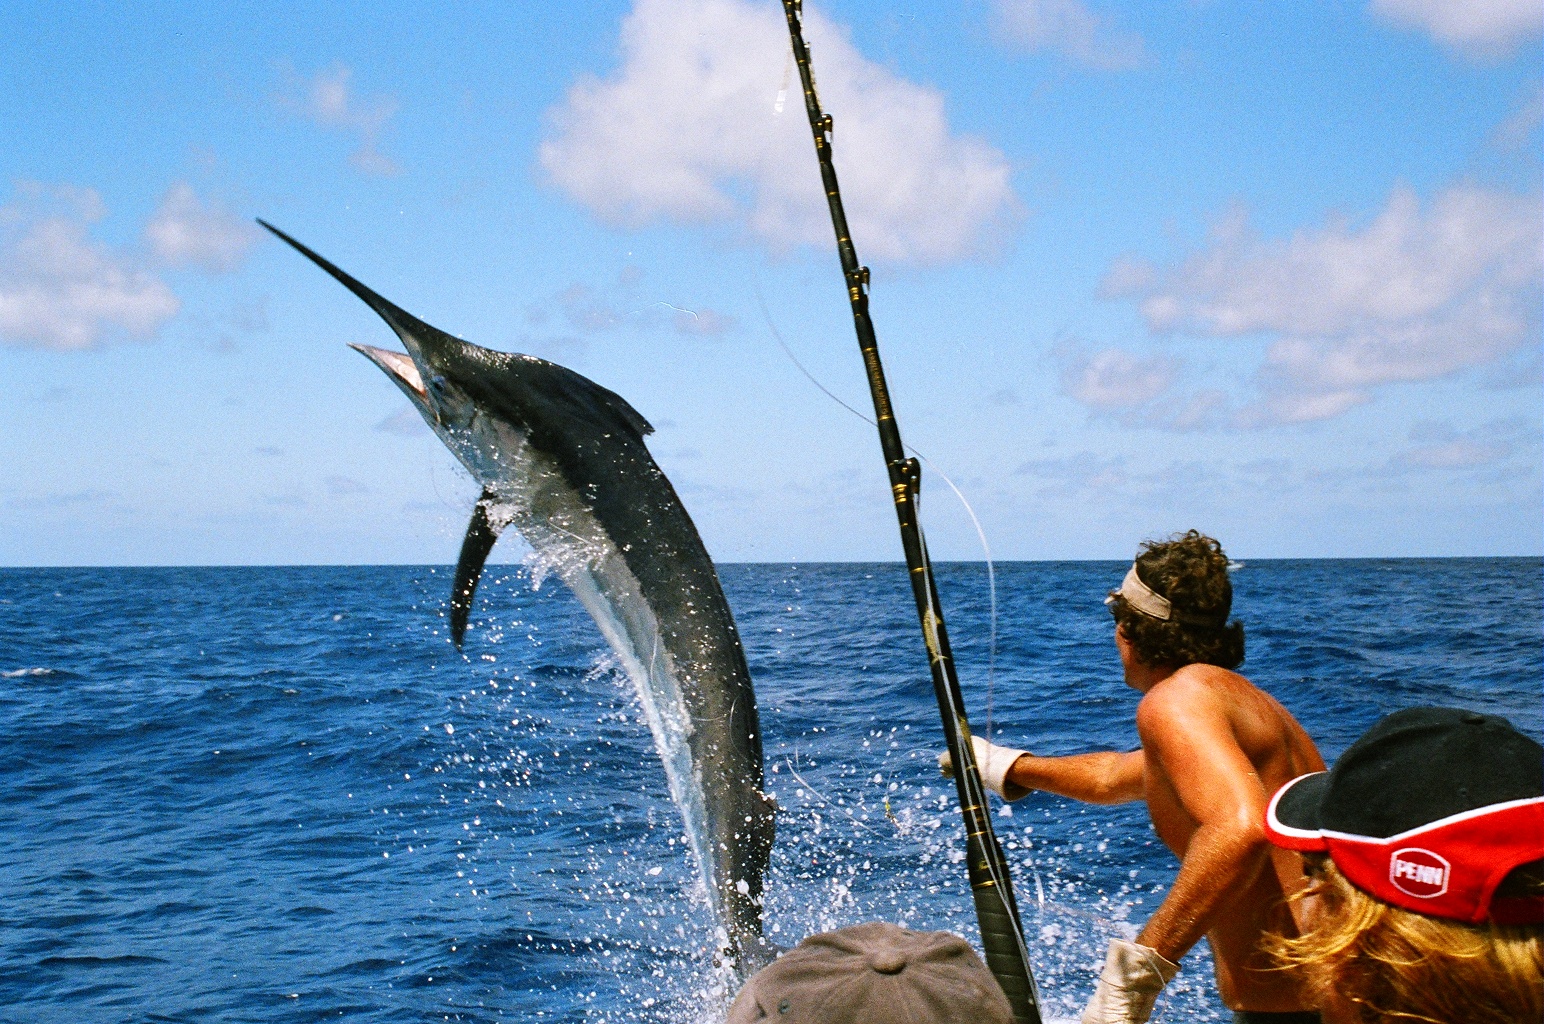 Sport Fishing In Fort Lauderdale Doesn’t Get Any Better Than This!